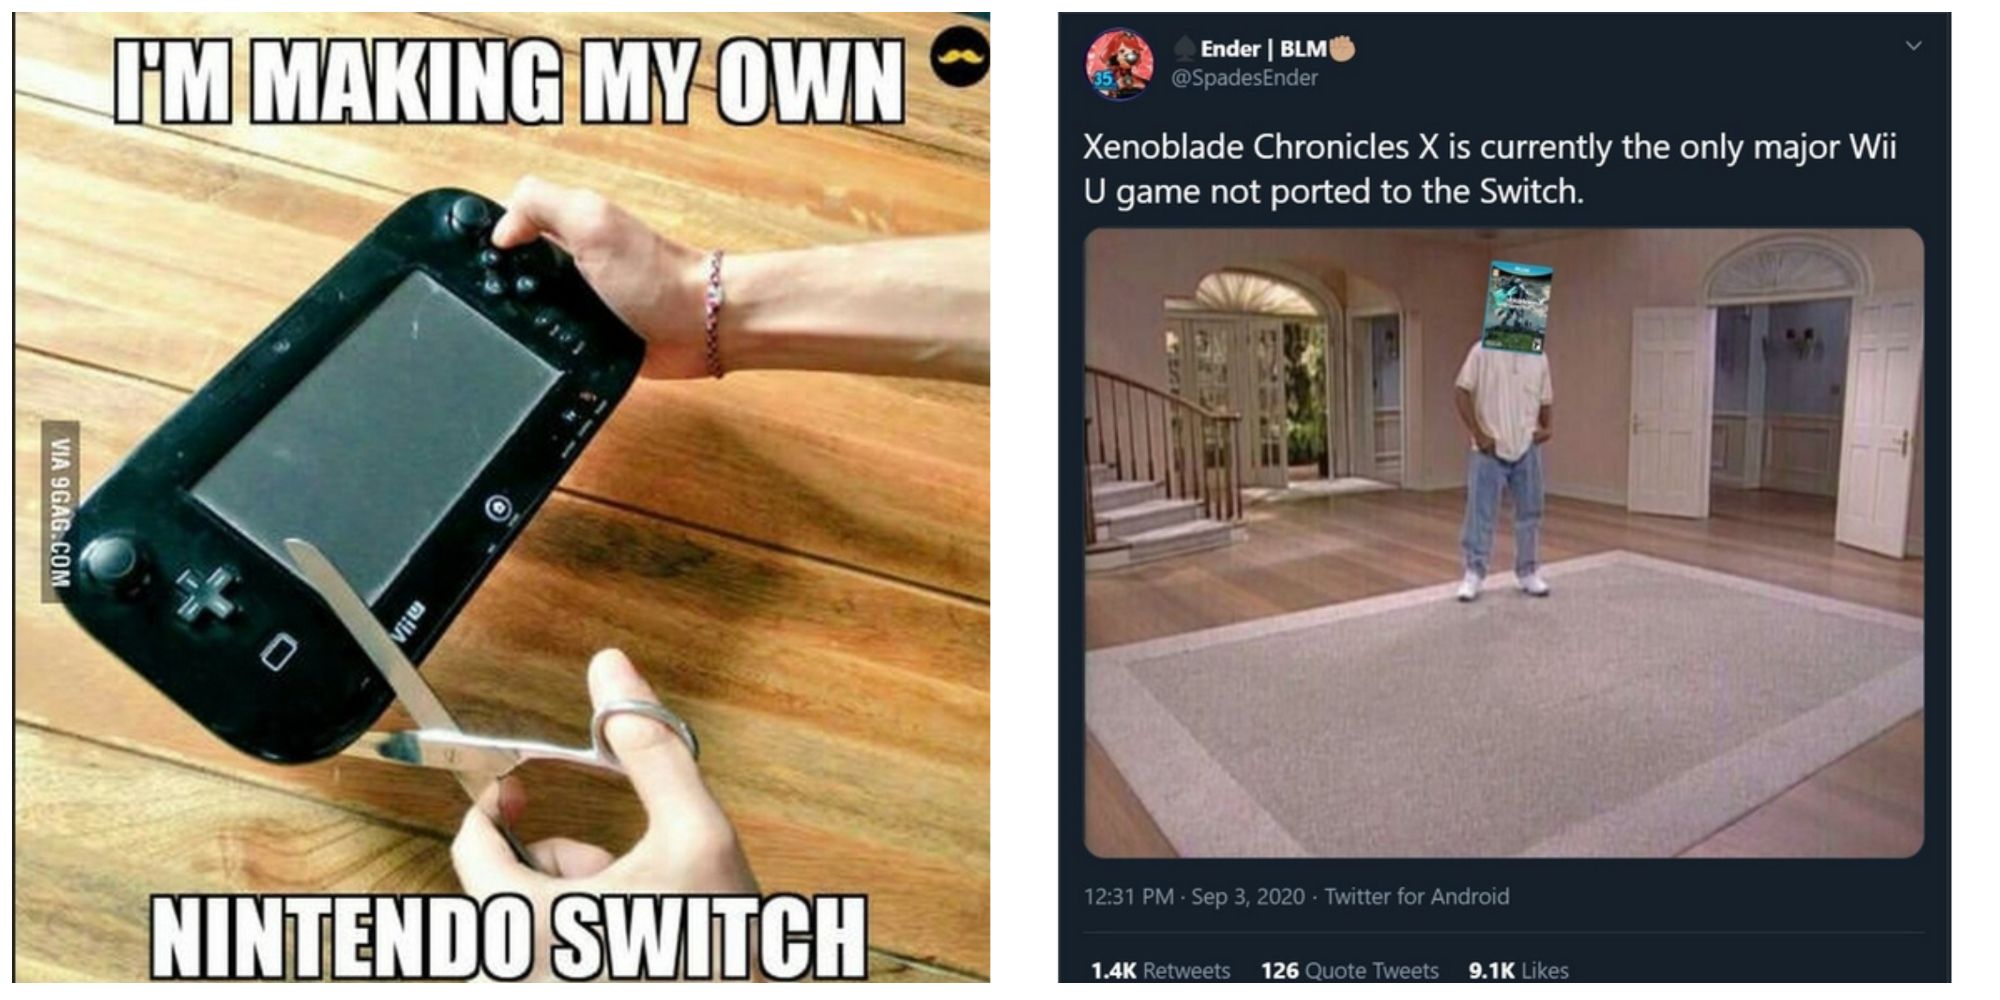 Left: A Wii U gamepad being cut with a Knife. Right: XenoBlade Chronicles X alone in an empty house. Image sources: inet.detik.com and knowyourmeme.com